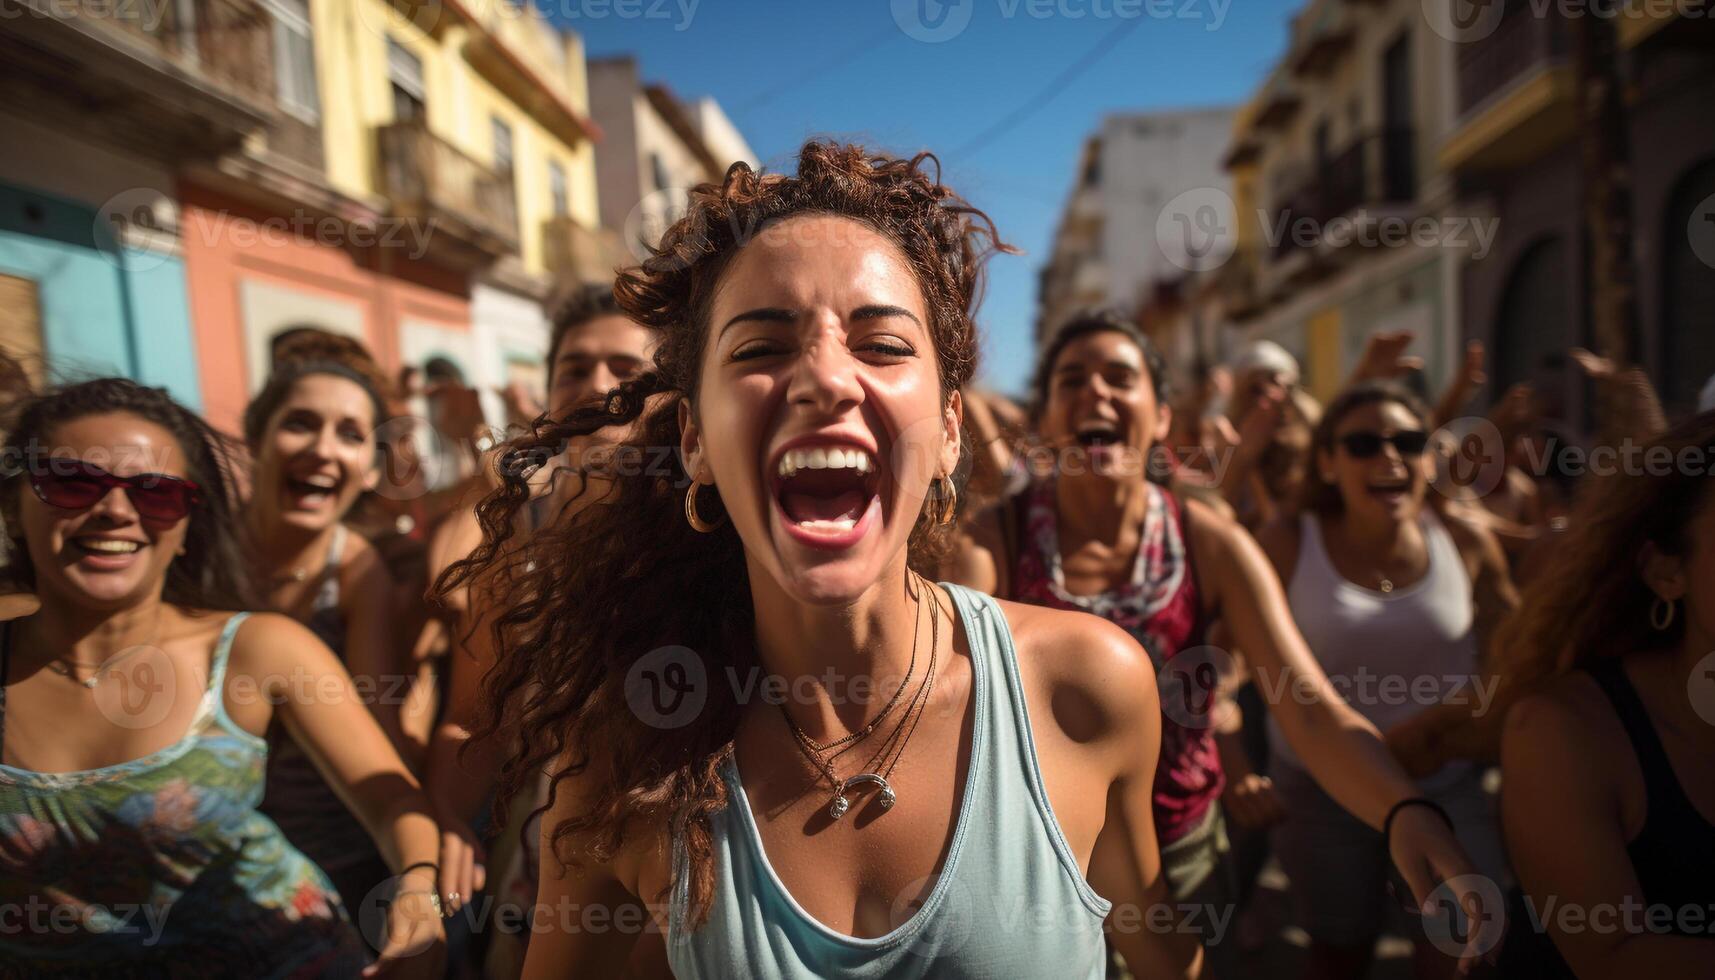 AI generated Young adults enjoying a fun, cheerful music festival outdoors generated by AI photo